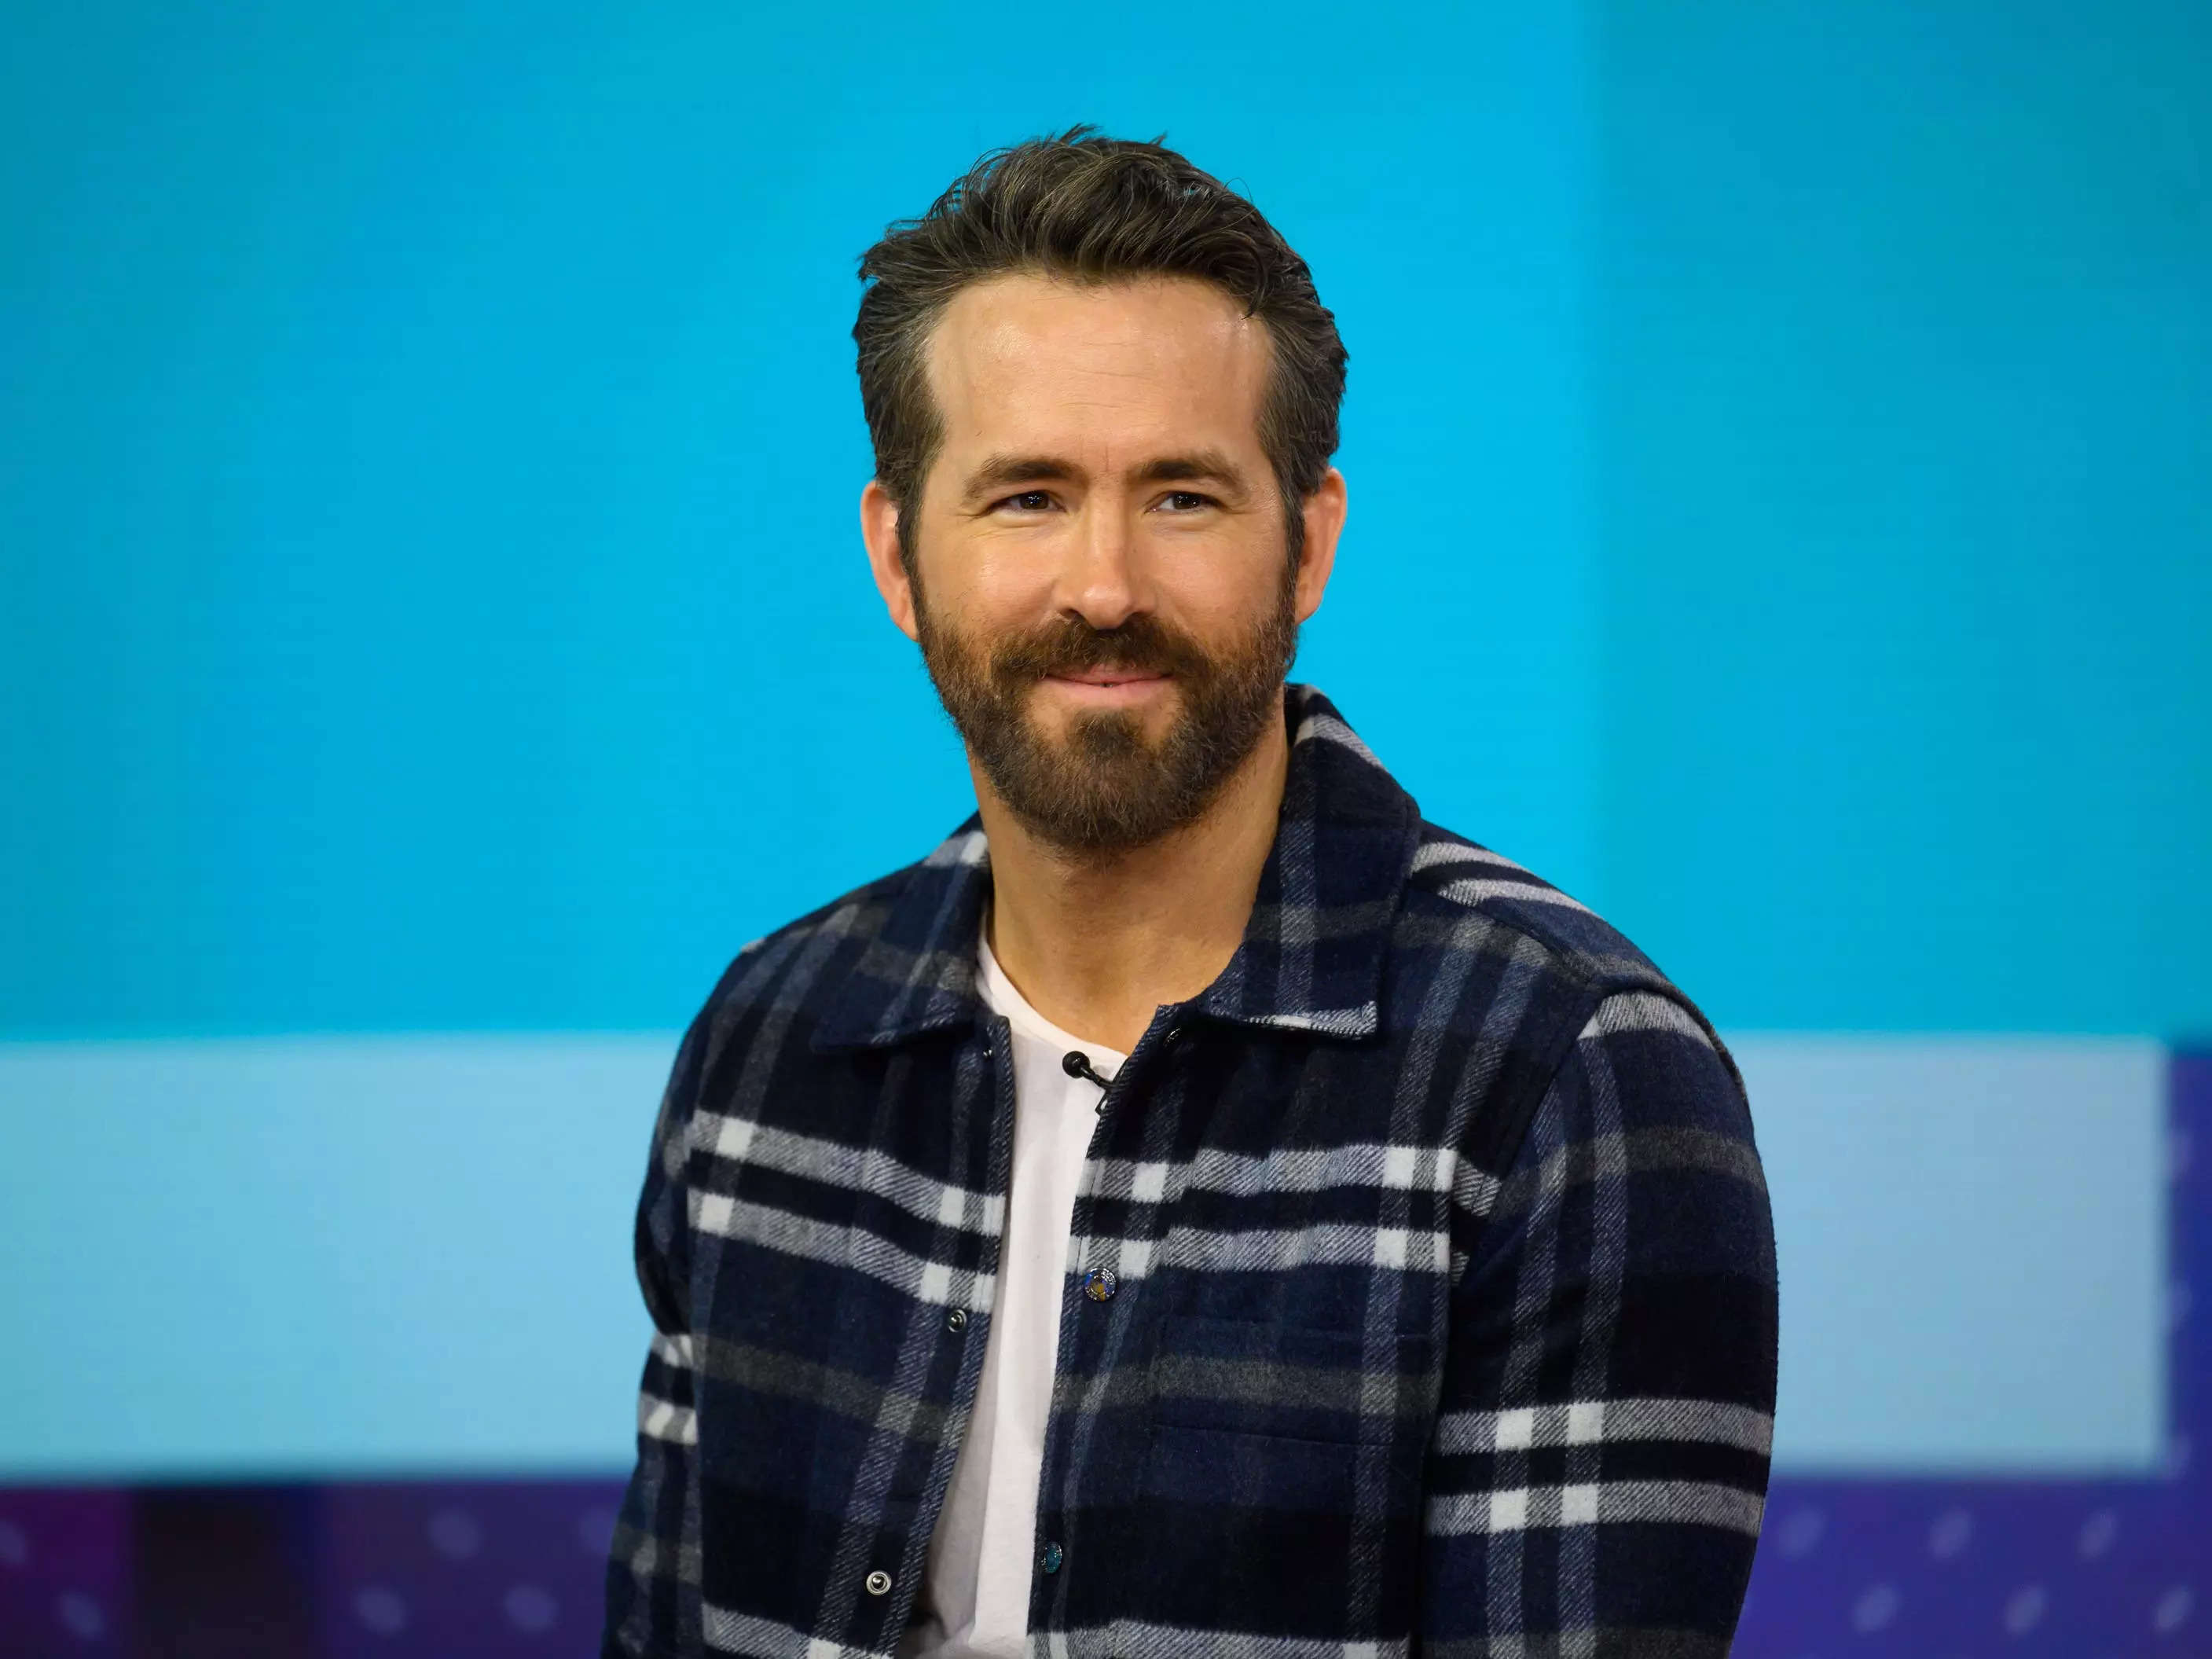 How Ryan Reynolds Went Beyond Movies to Build a Business Empire - WSJ